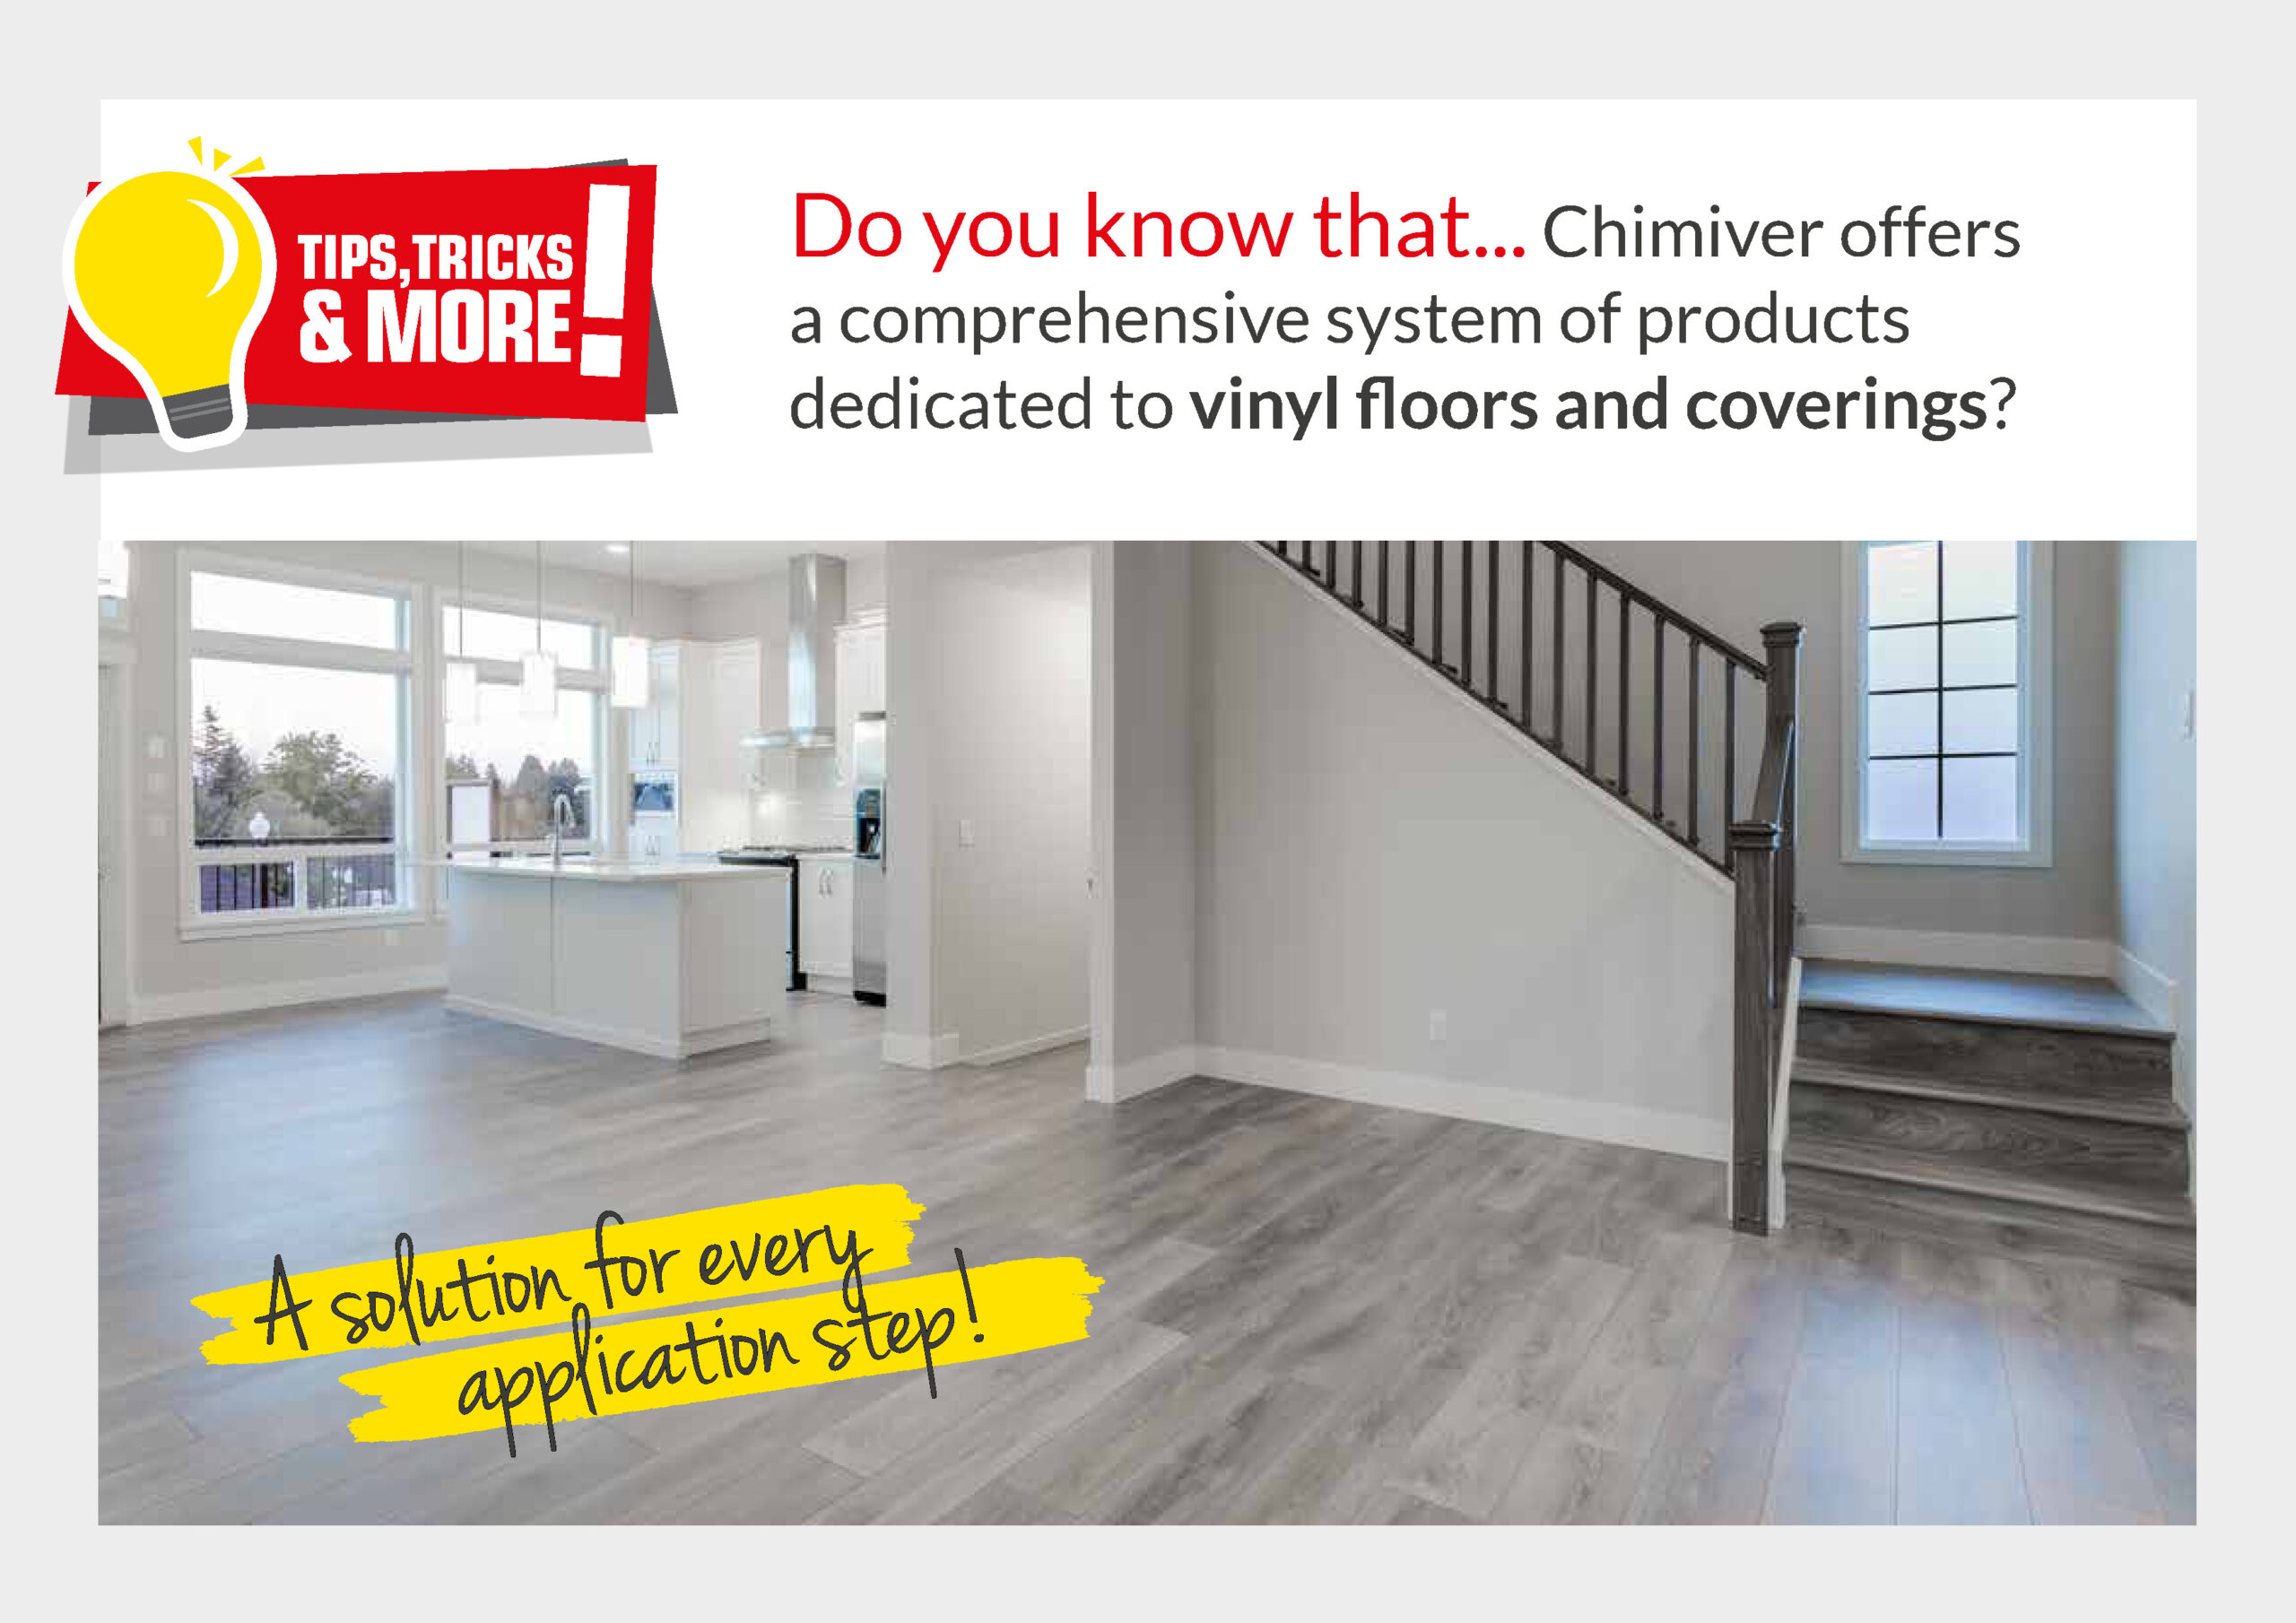 Floors and coverings in LVT, SPC, PVC, Linoleum: discover Chimiver’s dedicated range of self-leveling compounds, primers, lacquers, and detergents